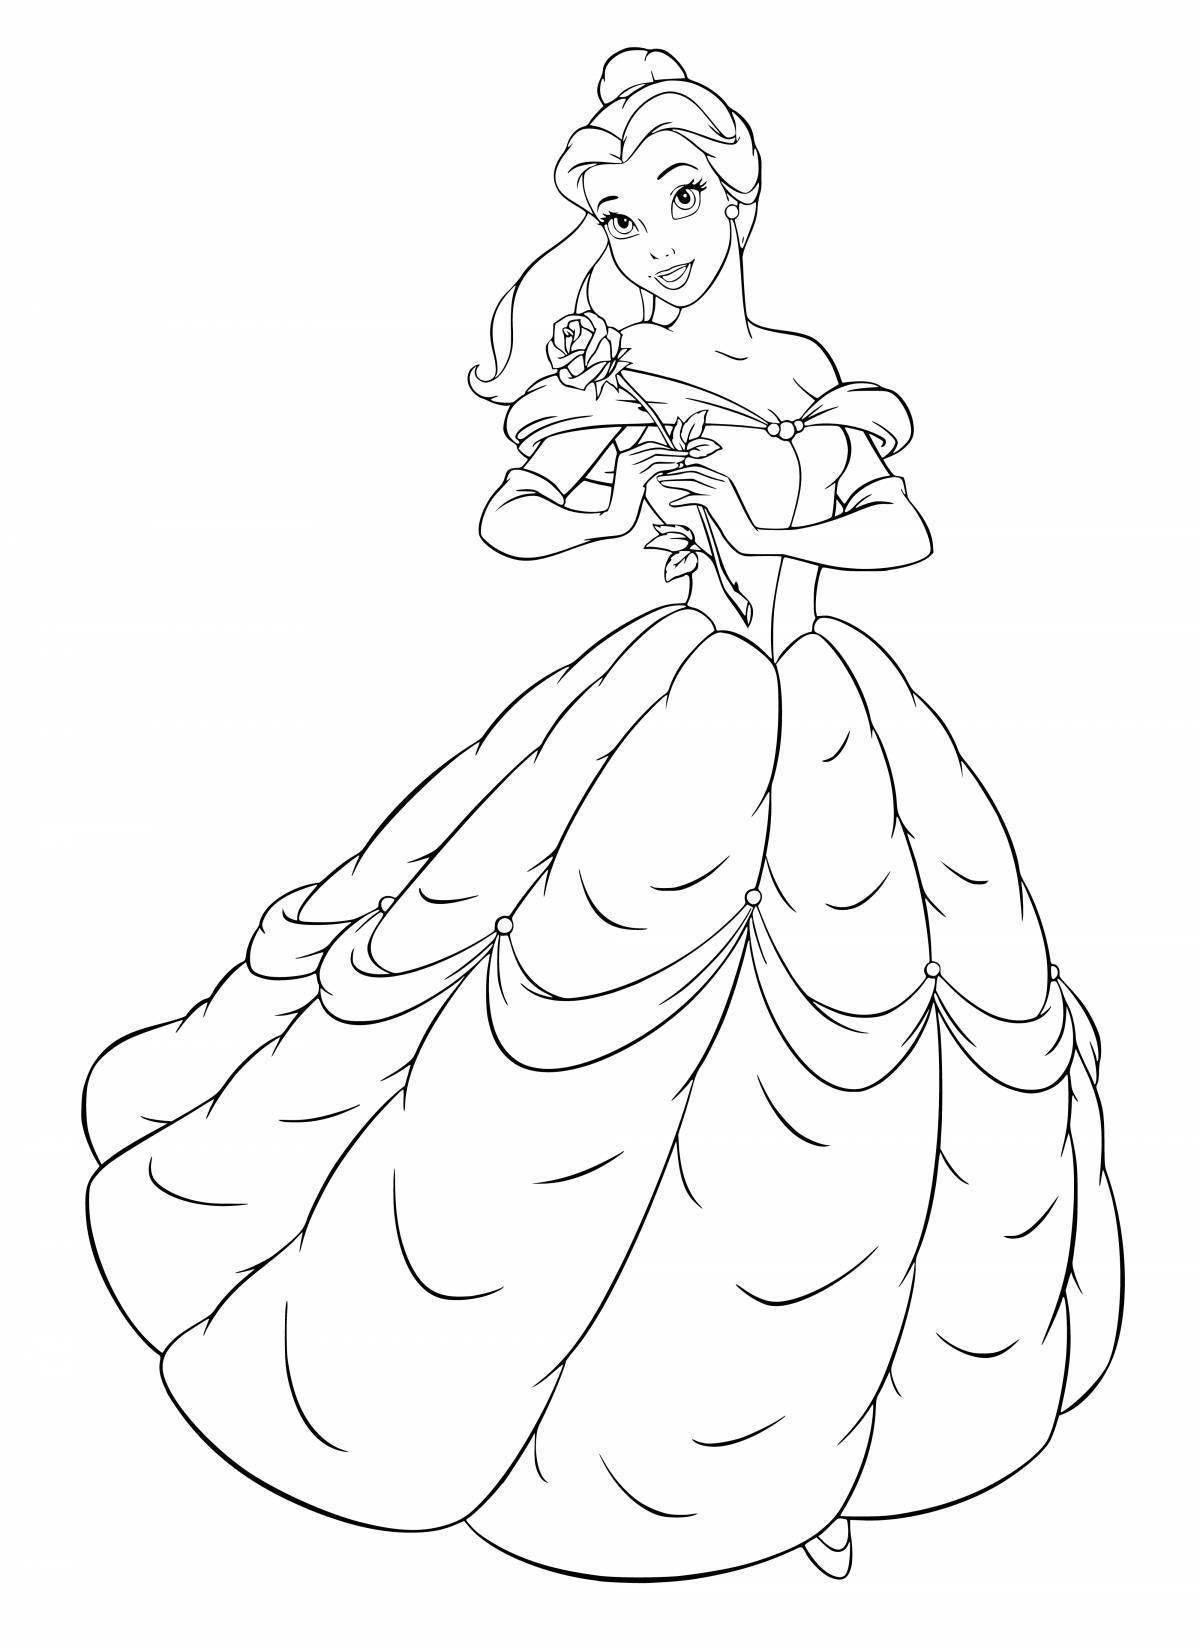 Glowing belle coloring page